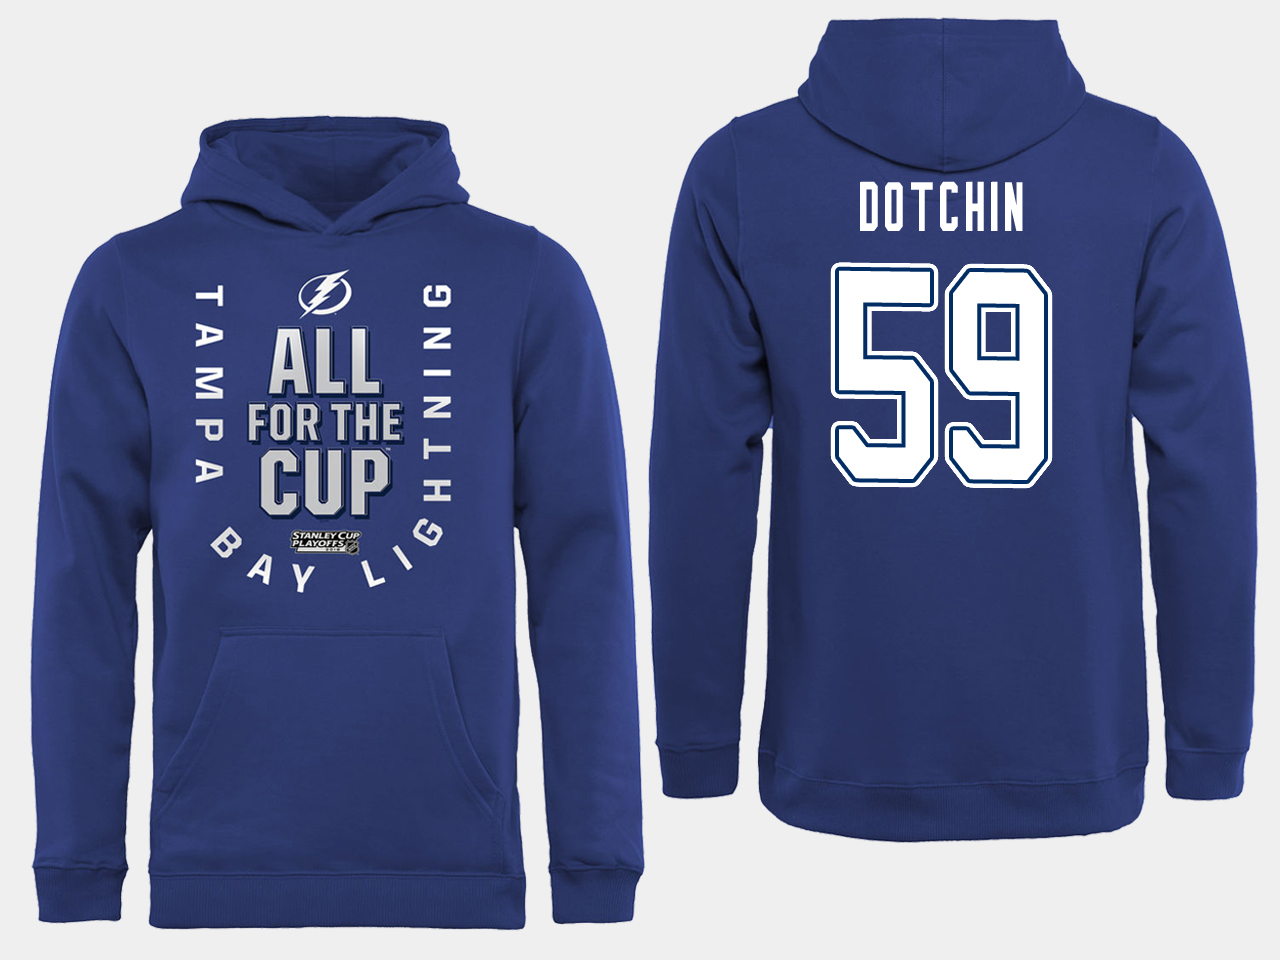 NHL Men adidas Tampa Bay Lightning #59 Dotchin blue All for the Cup Hoodie->washington capitals->NHL Jersey